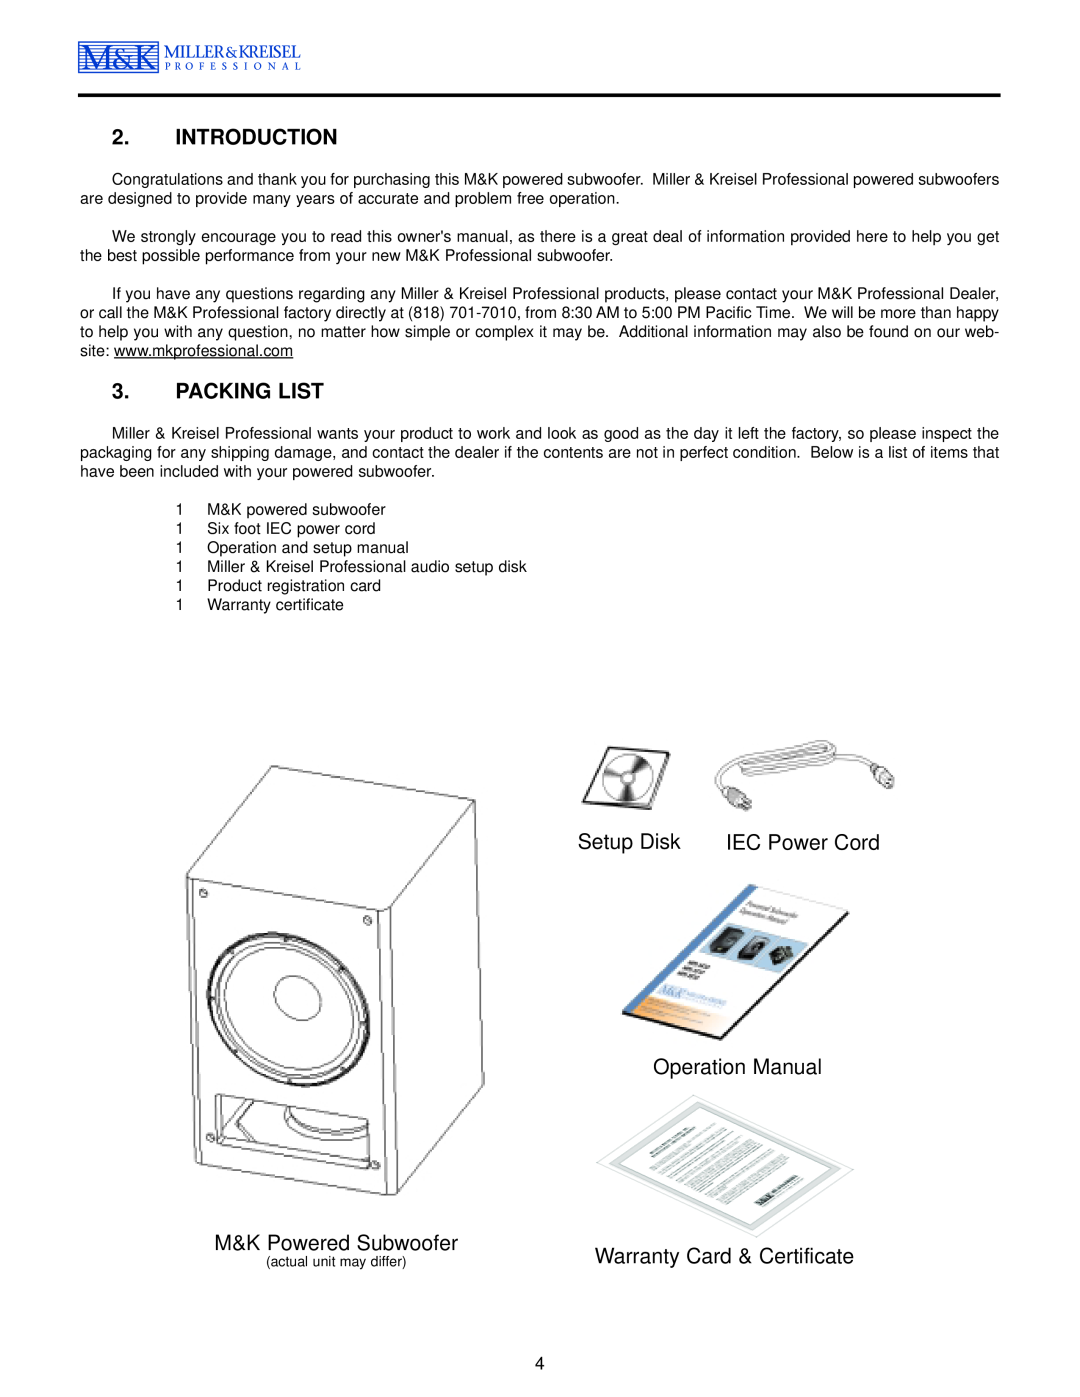 MK Sound MPS-2810 operation manual Setup Disk, IEC Power Cord, M&K Powered Subwoofer, Warranty Card & Certificate 